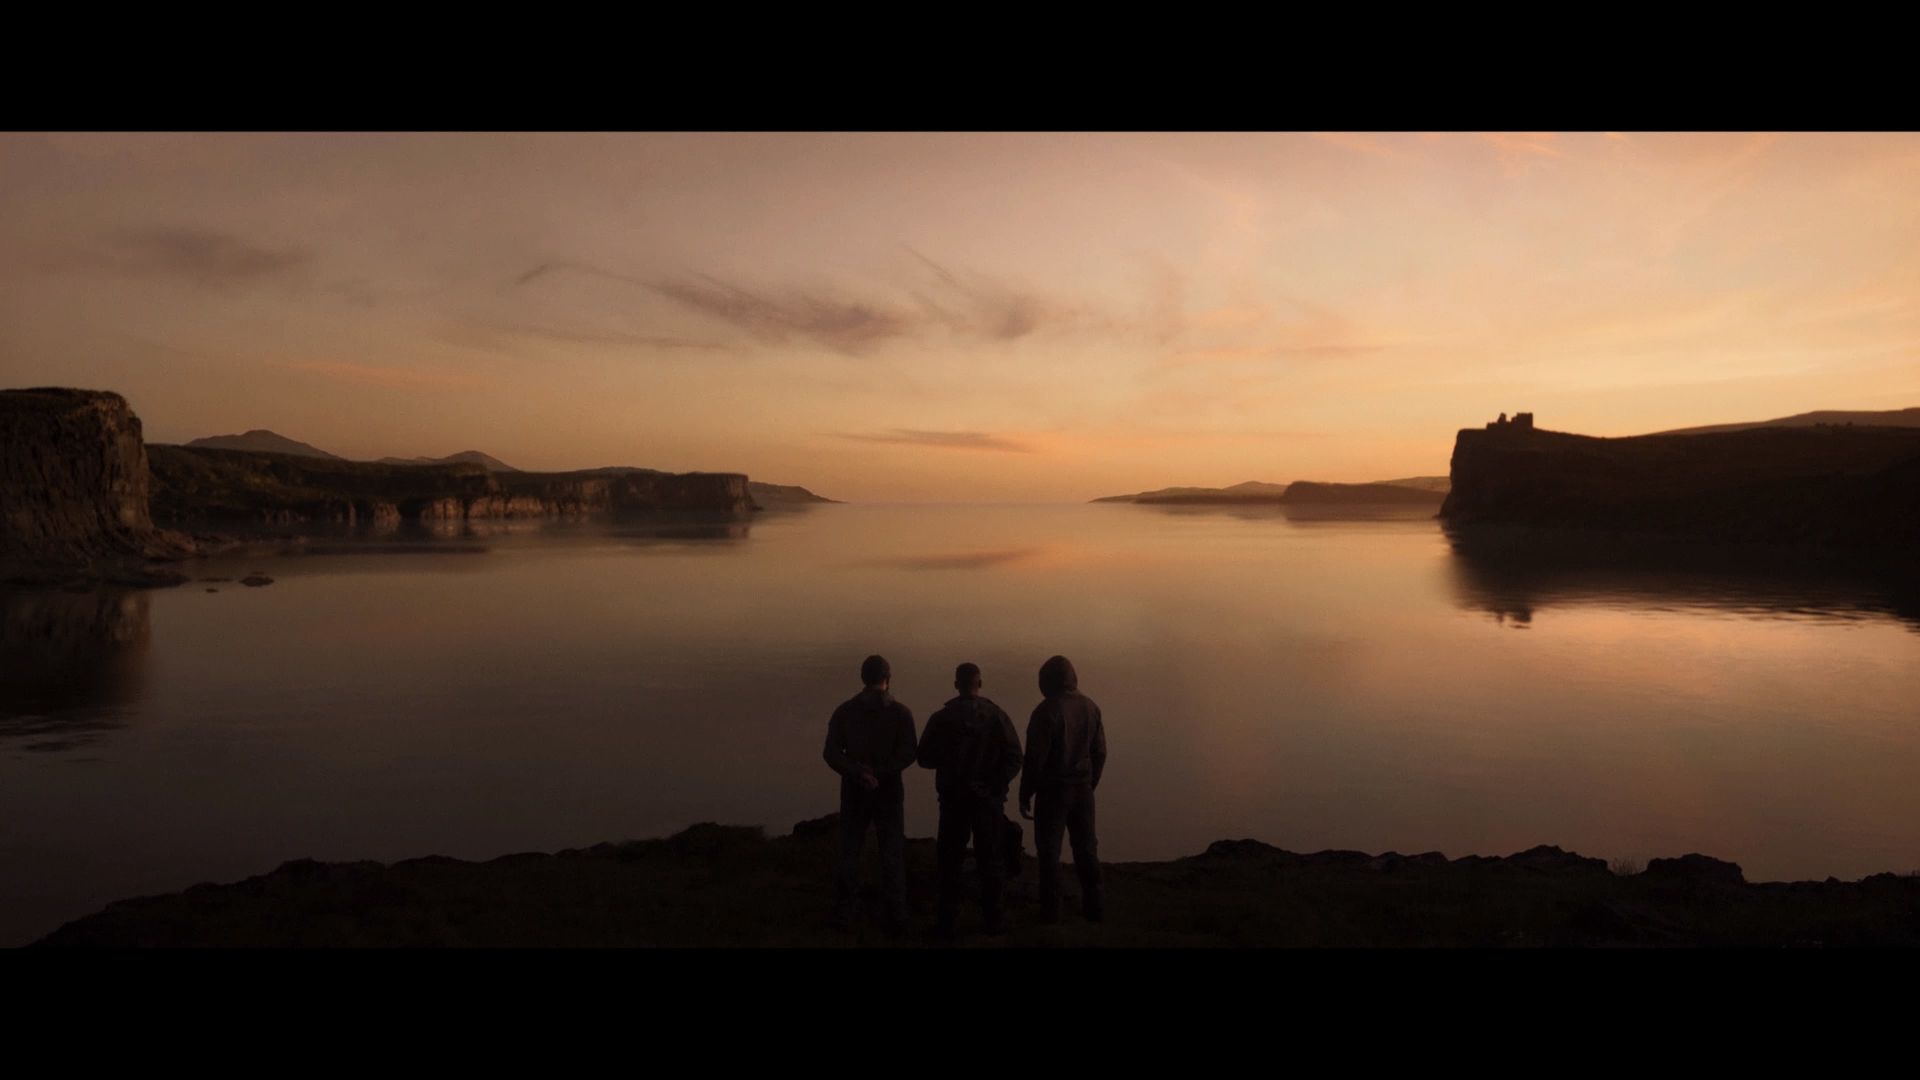 Screenshot from MW3 2023 shows 3 men standing on cliffside overlooking a large body of water with the sunsetting.